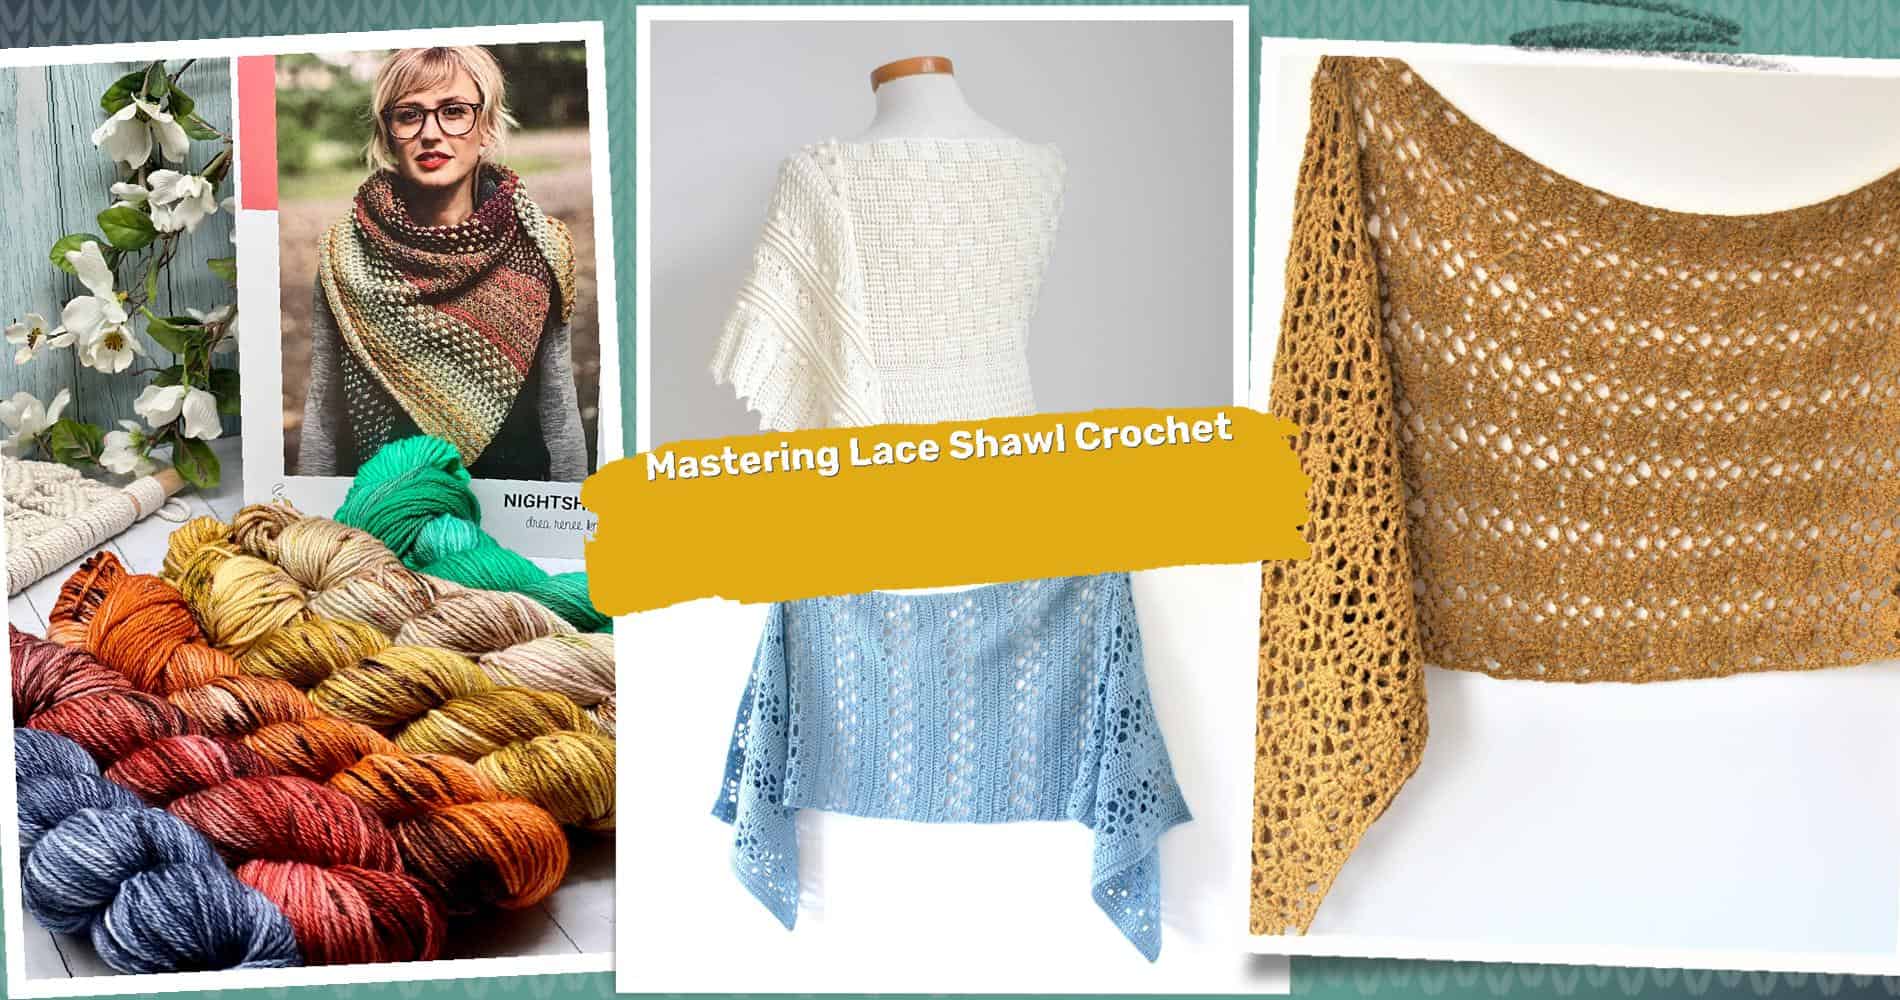 40 Lace Shawl Crochet Patterns: Master the Art of Delicate Design